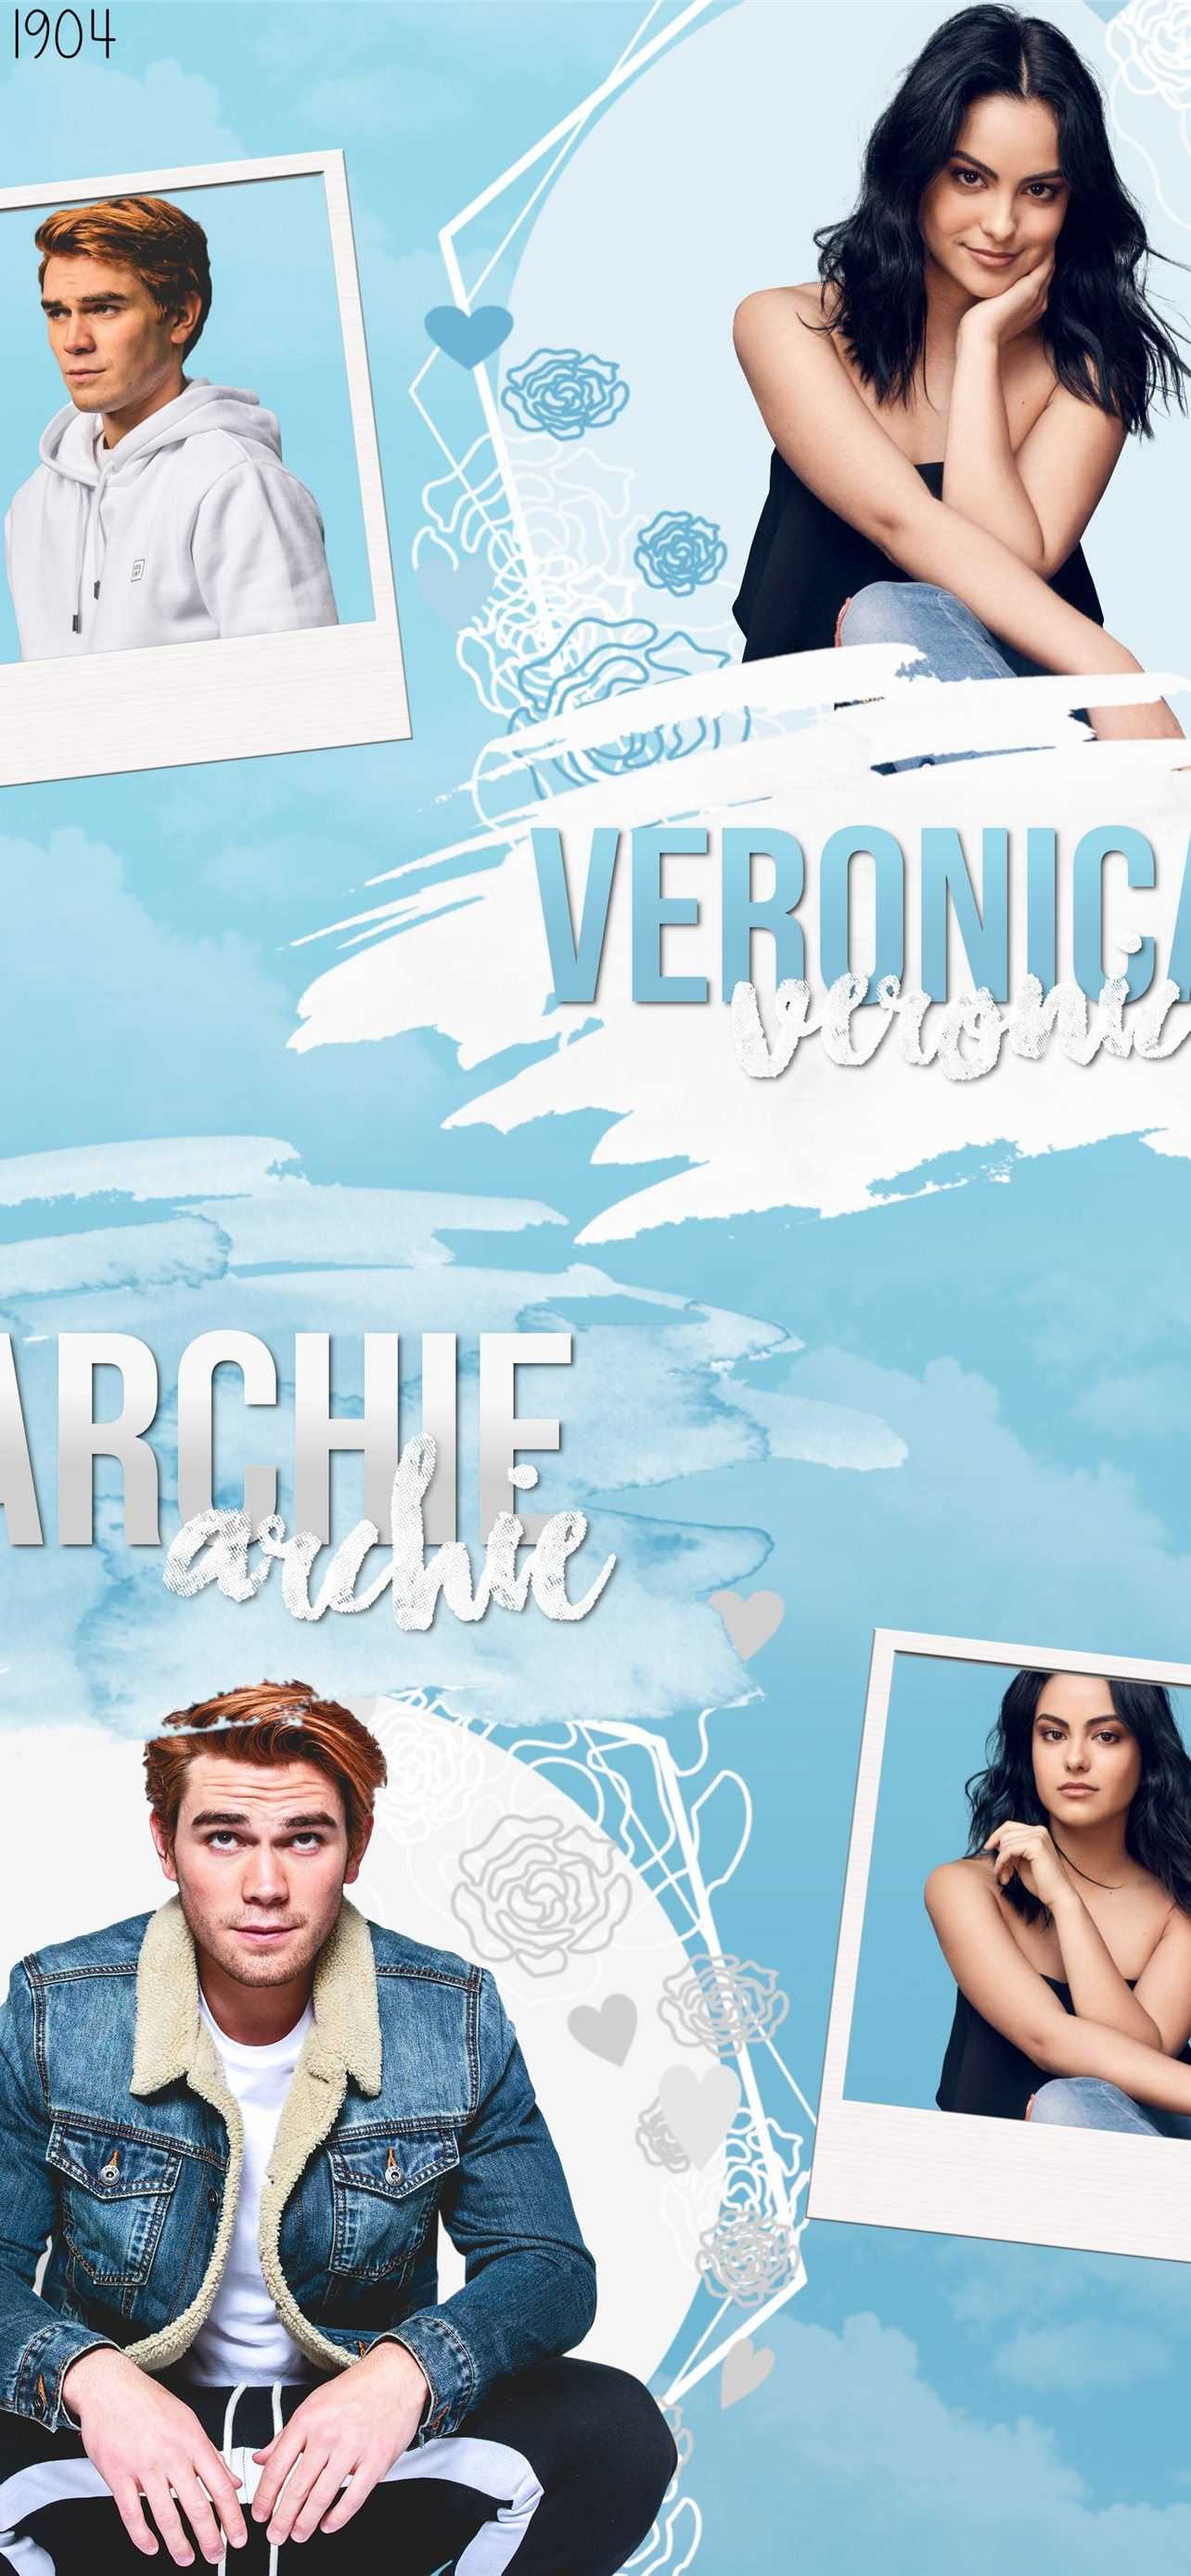 A poster with pictures of veronica and cherie - Riverdale